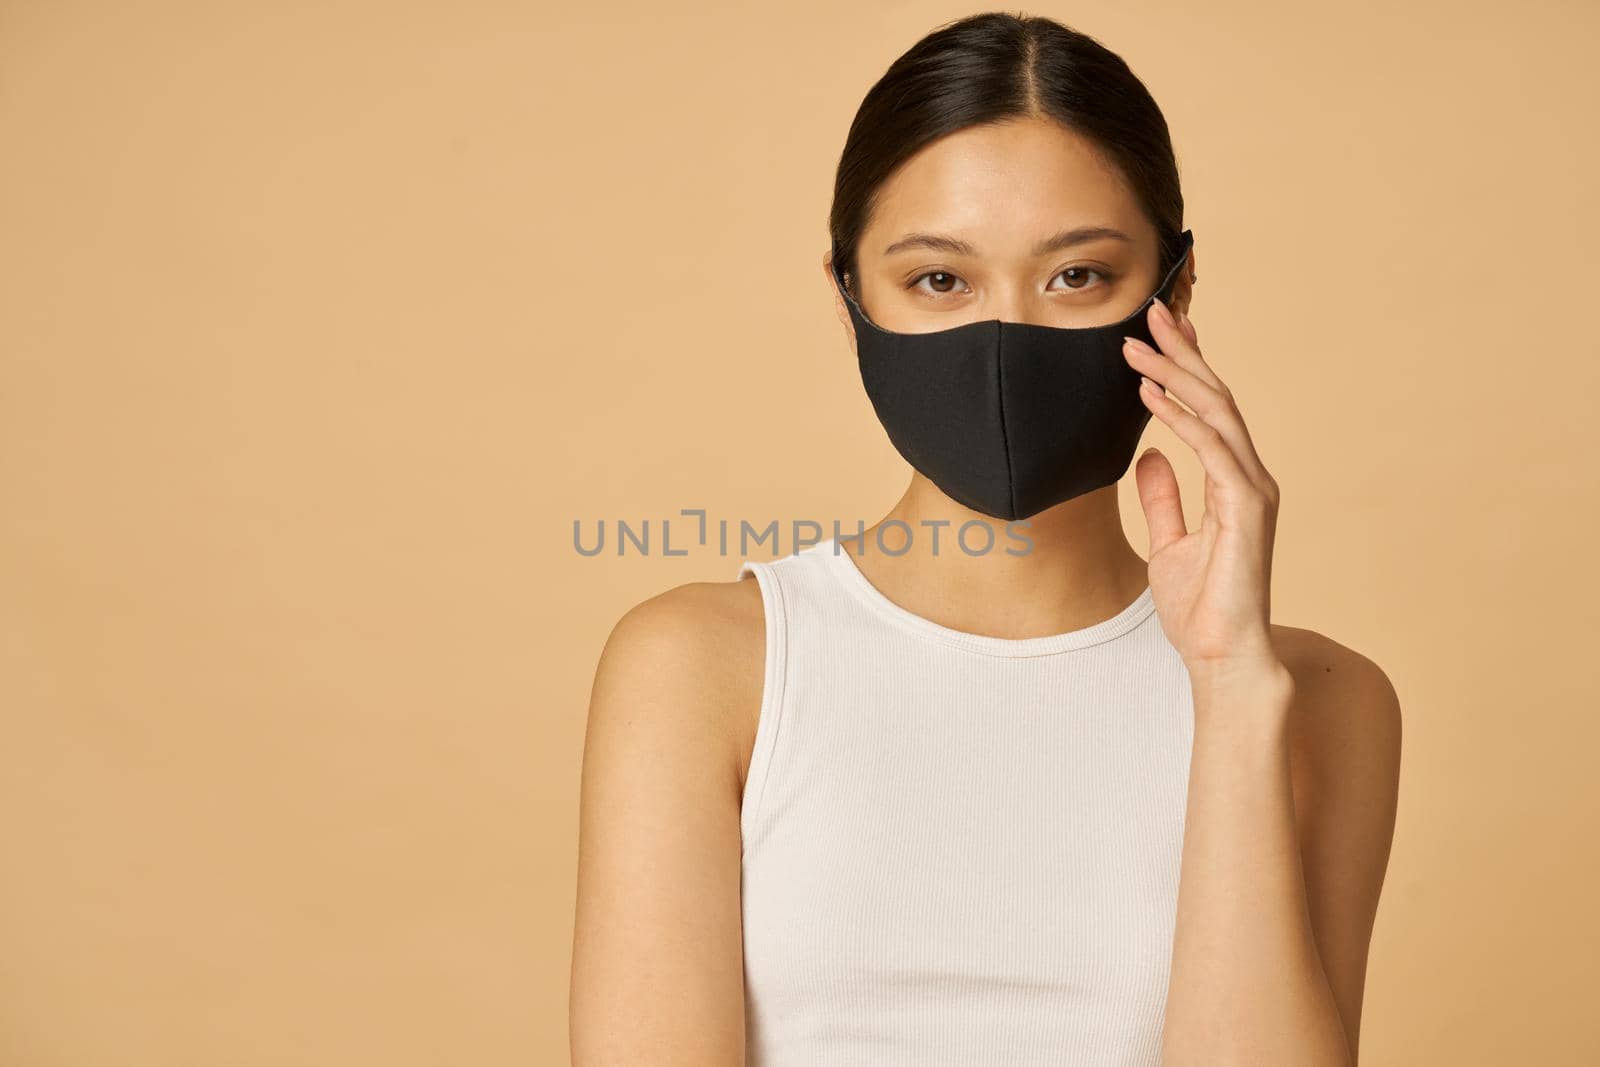 Charming young woman wearing black facial mask looking at camera, posing isolated over beige background. Safety, pandemic concept